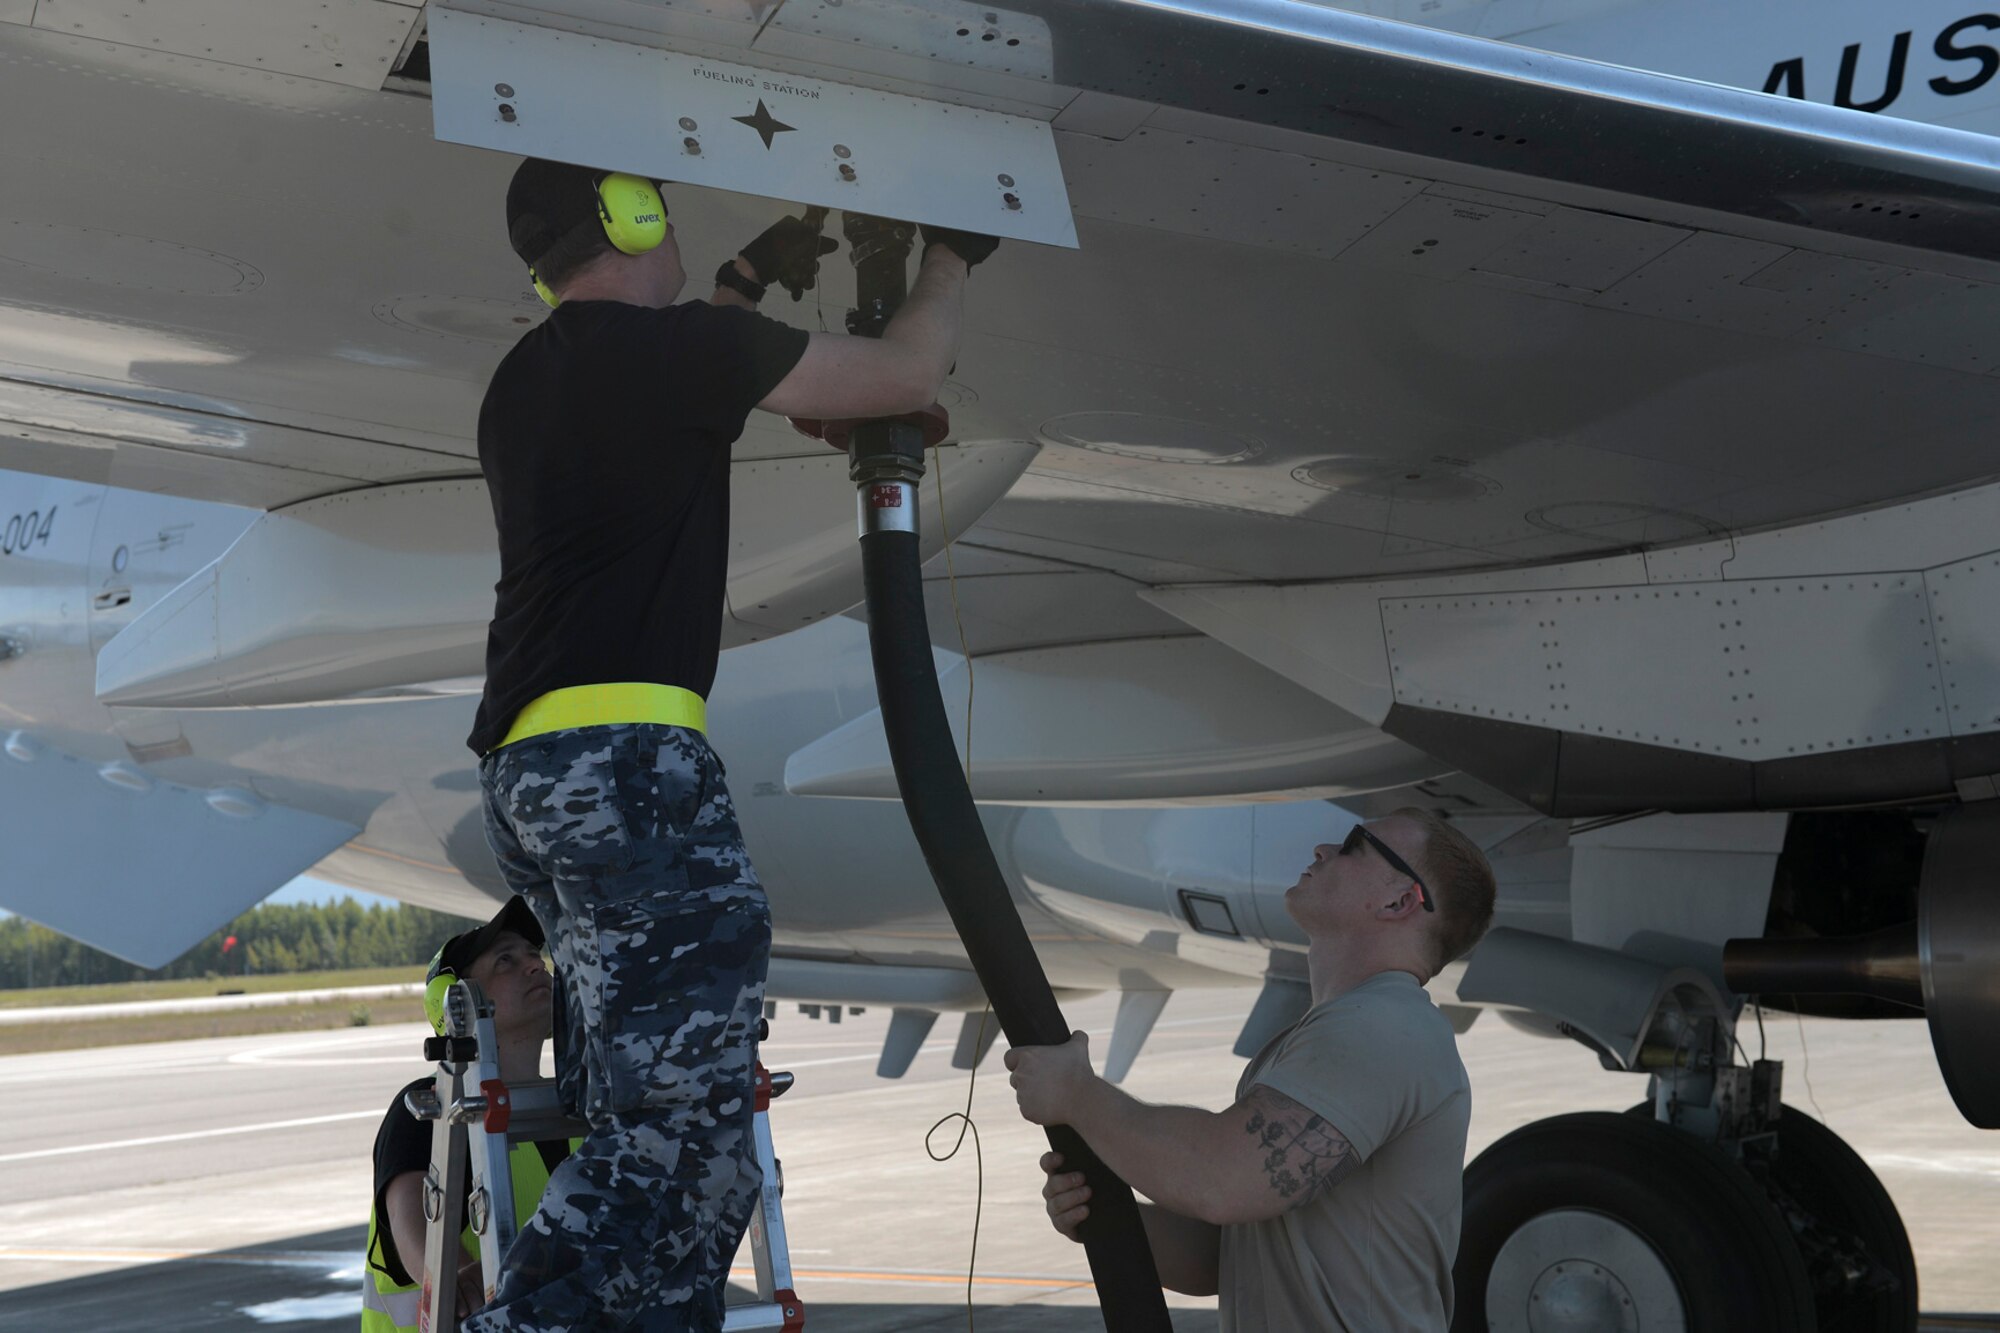 (Left) Mark Dunn and (center) Kayne Markham, Royal Australian Air Force leading aircraftsman with the 42 Wing, 2 Squadron, work with U.S. Air Force Senior Airman Reinhardt Andersen to refuel an E-3 Sentry during RED FLAG-Alaska at Joint Base Elmendorf-Richardson, Alaska, Aug. 14, 2015. Andersen, a fuels distribution operator with the 18th Logistical Readiness Squadron out of Kadena Air Base, Japan, is just one member with the Pacific Air Forces deployed to Alaska in support of RFA, gaining experience in multi-national and joint operations. (U.S. Air Force photo by Staff Sgt. Cody H. Ramirez/Released)